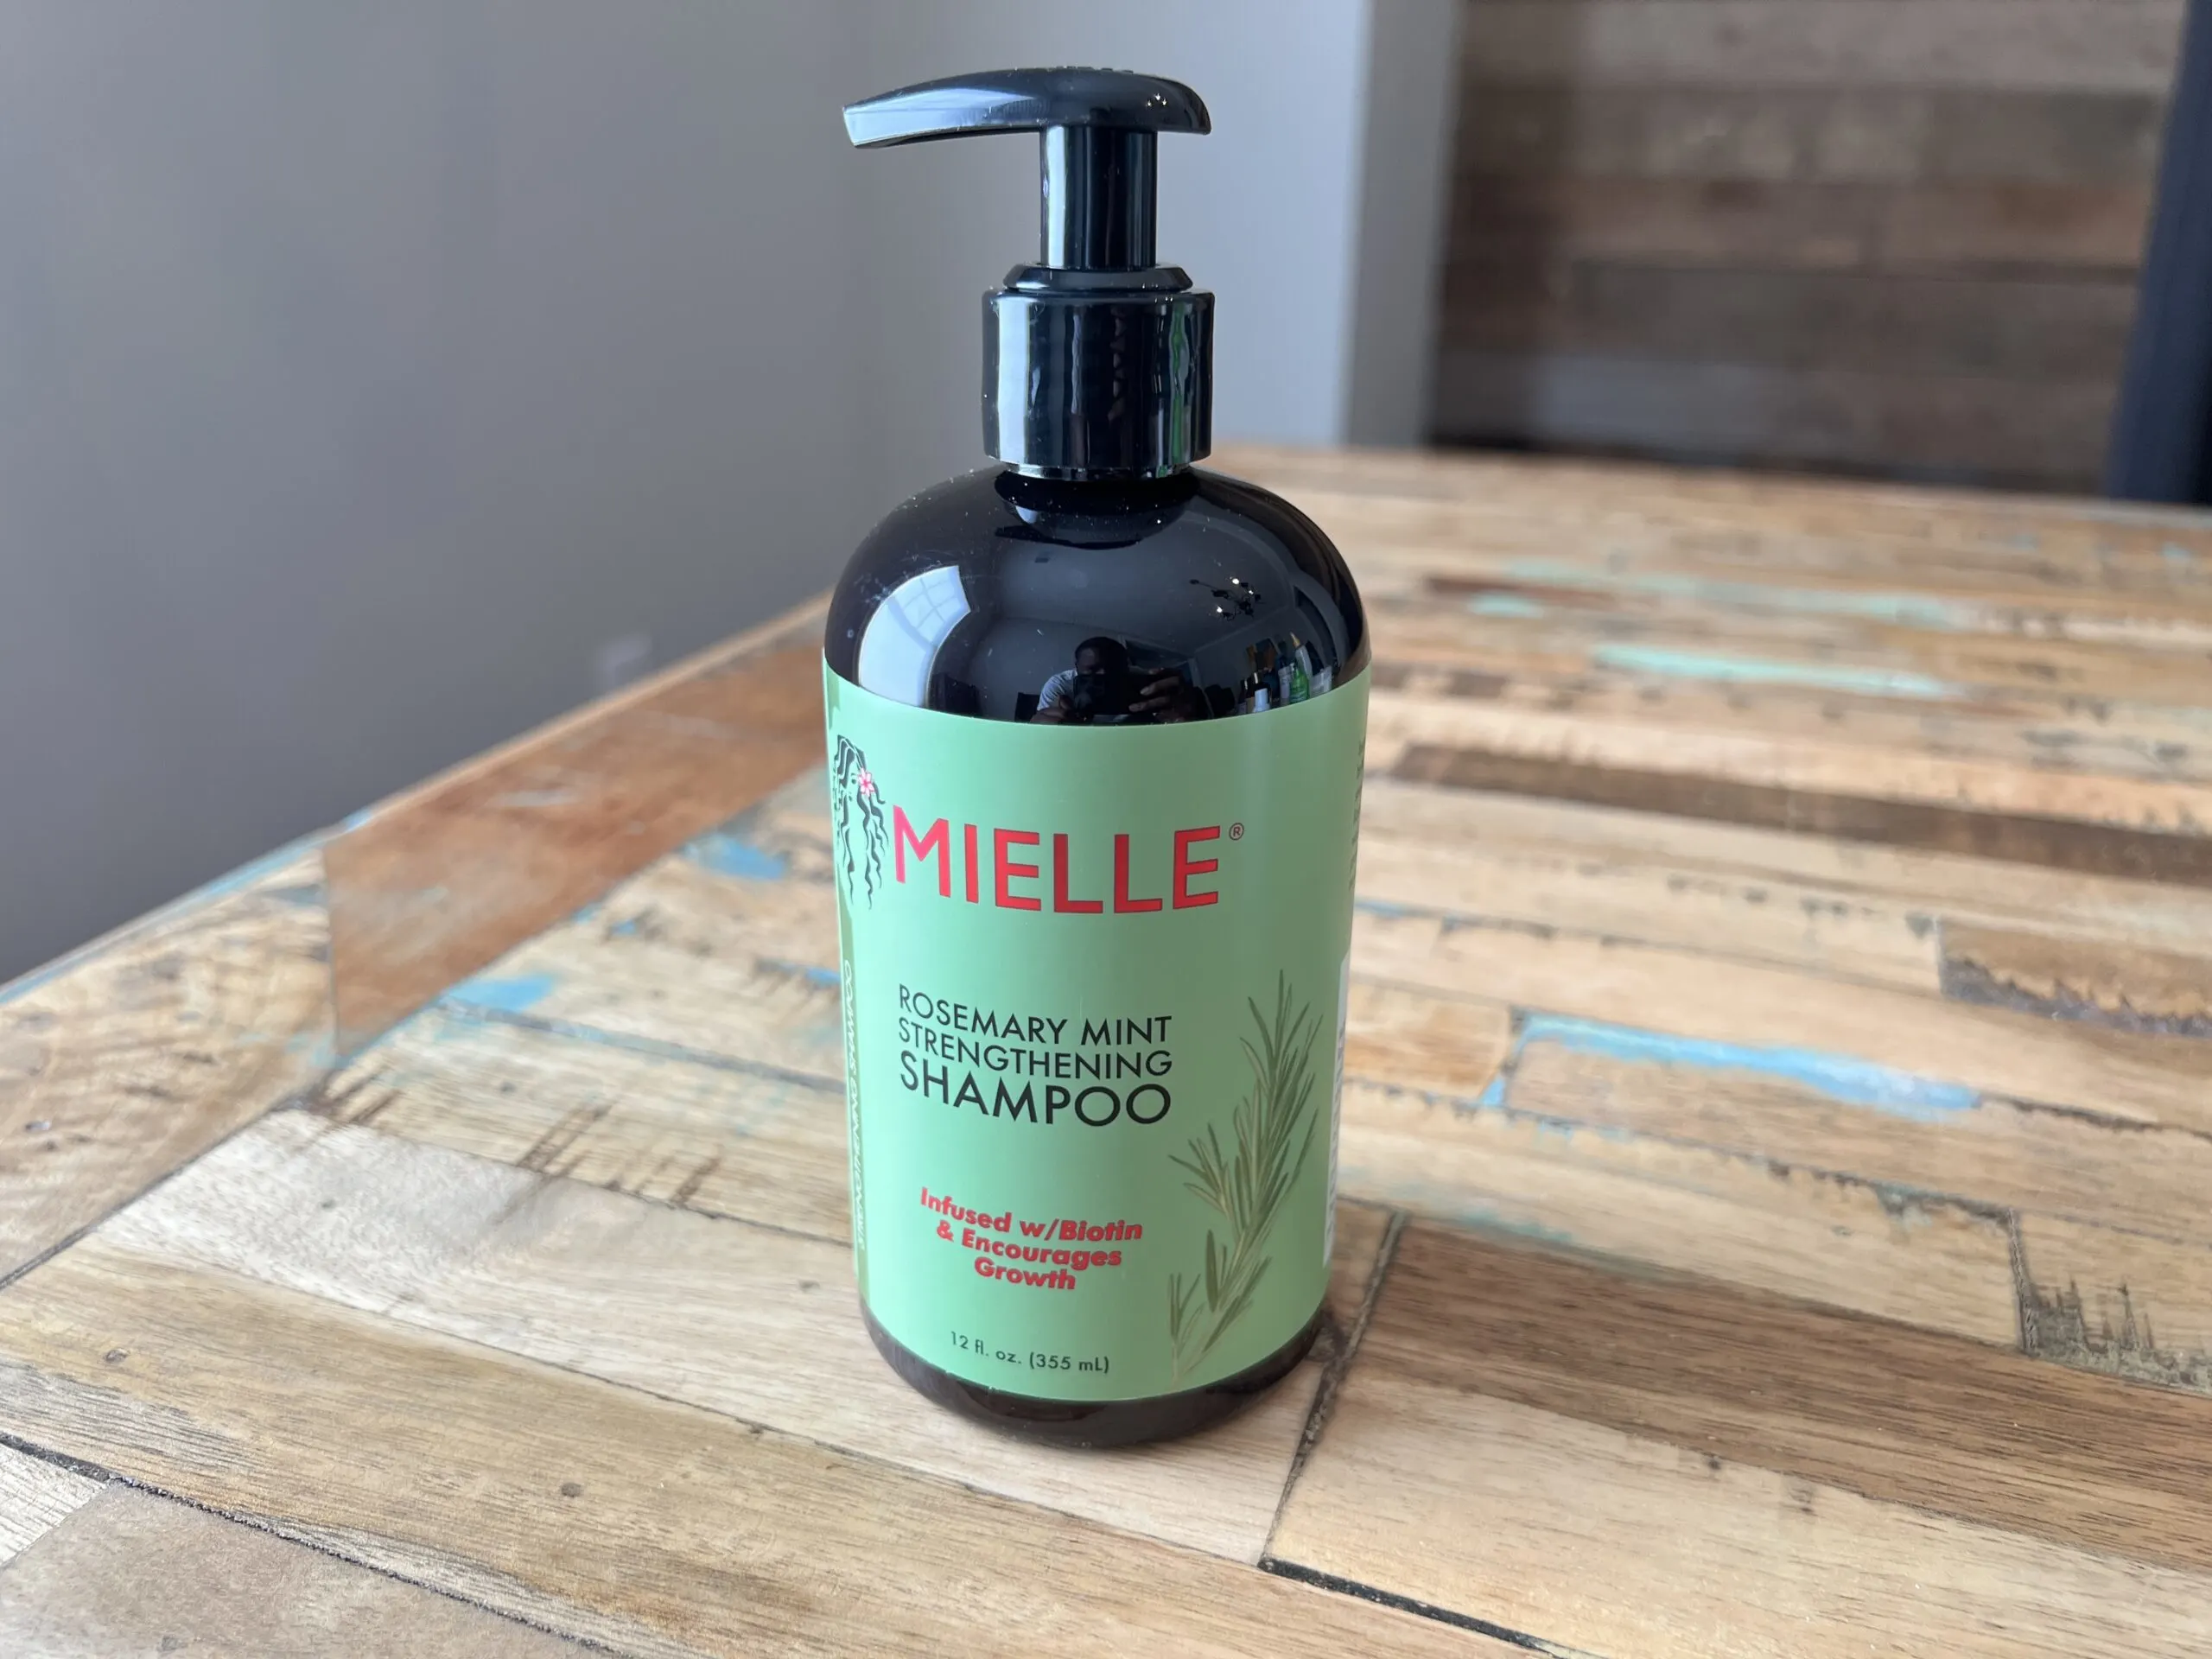 Mielle Organics Rosemary Mint Strengthening Shampoo that's infused with biotin and encourages growth.